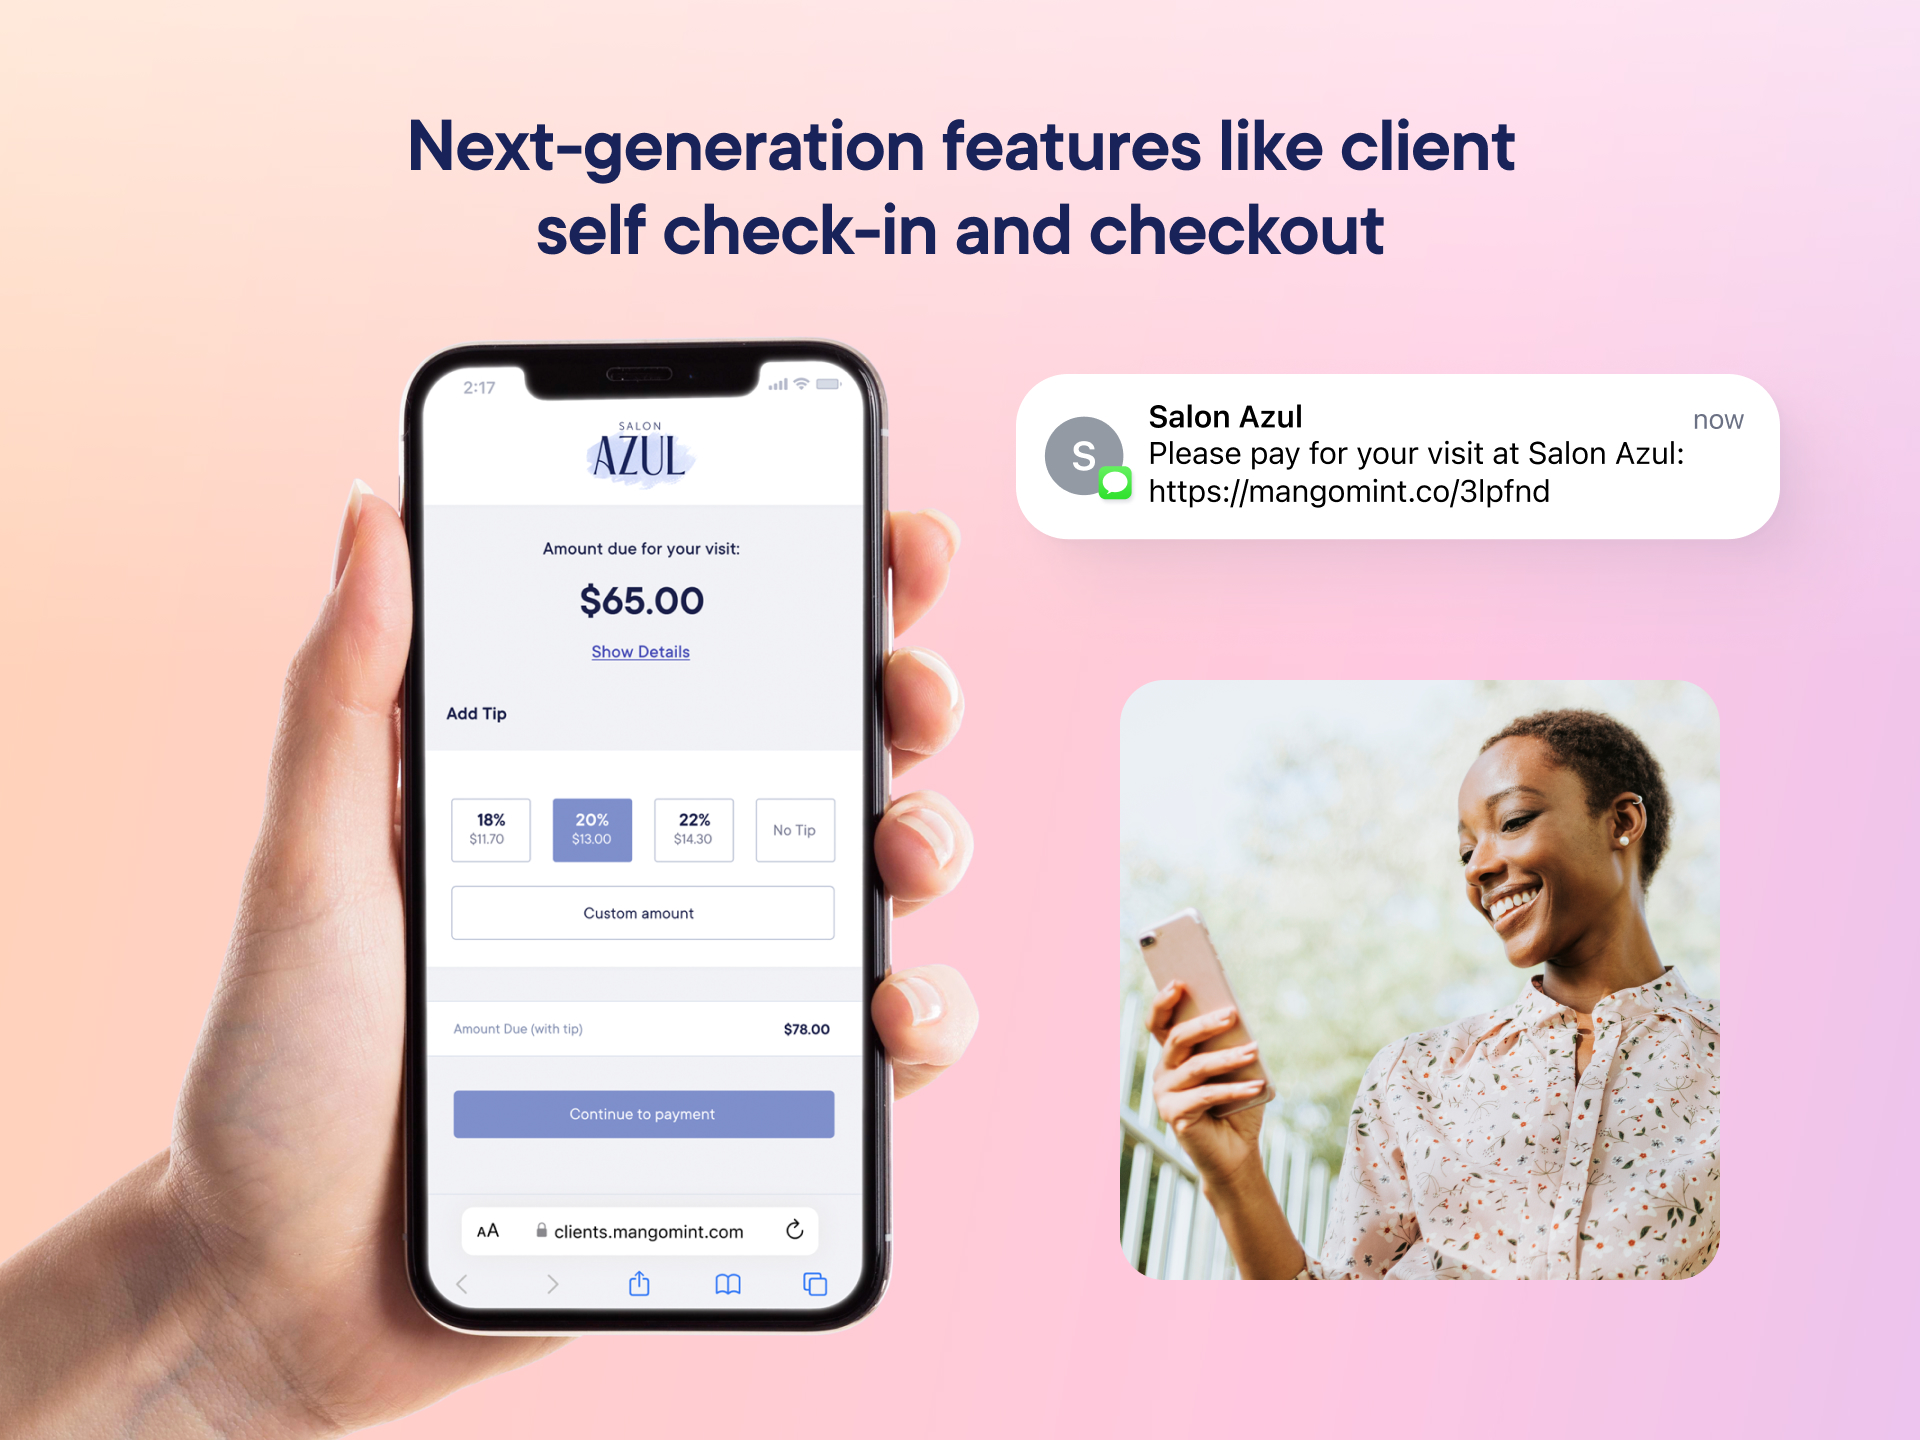  Next-generation features like client self check-in and checkout.